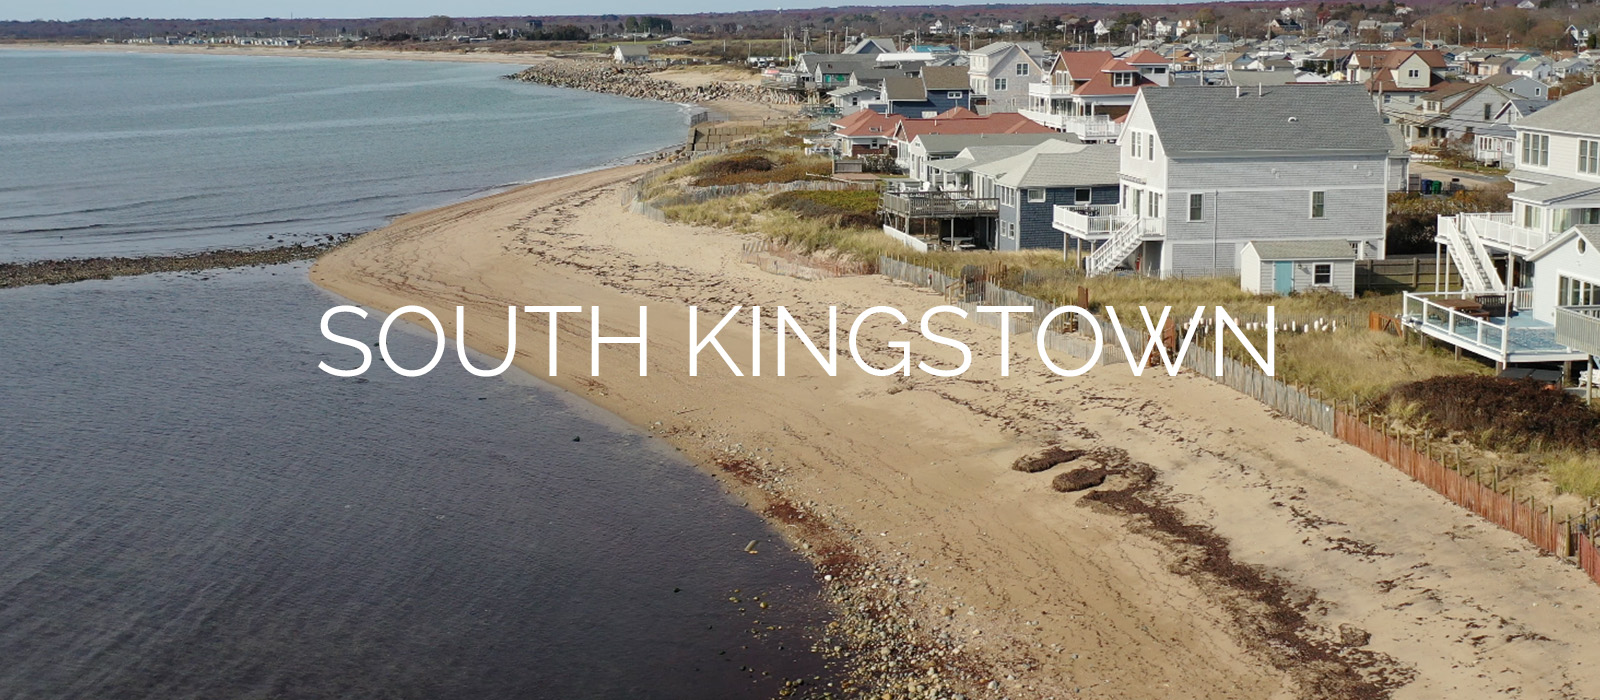 RISE Real Estate Consultants South Kingstown City Guide